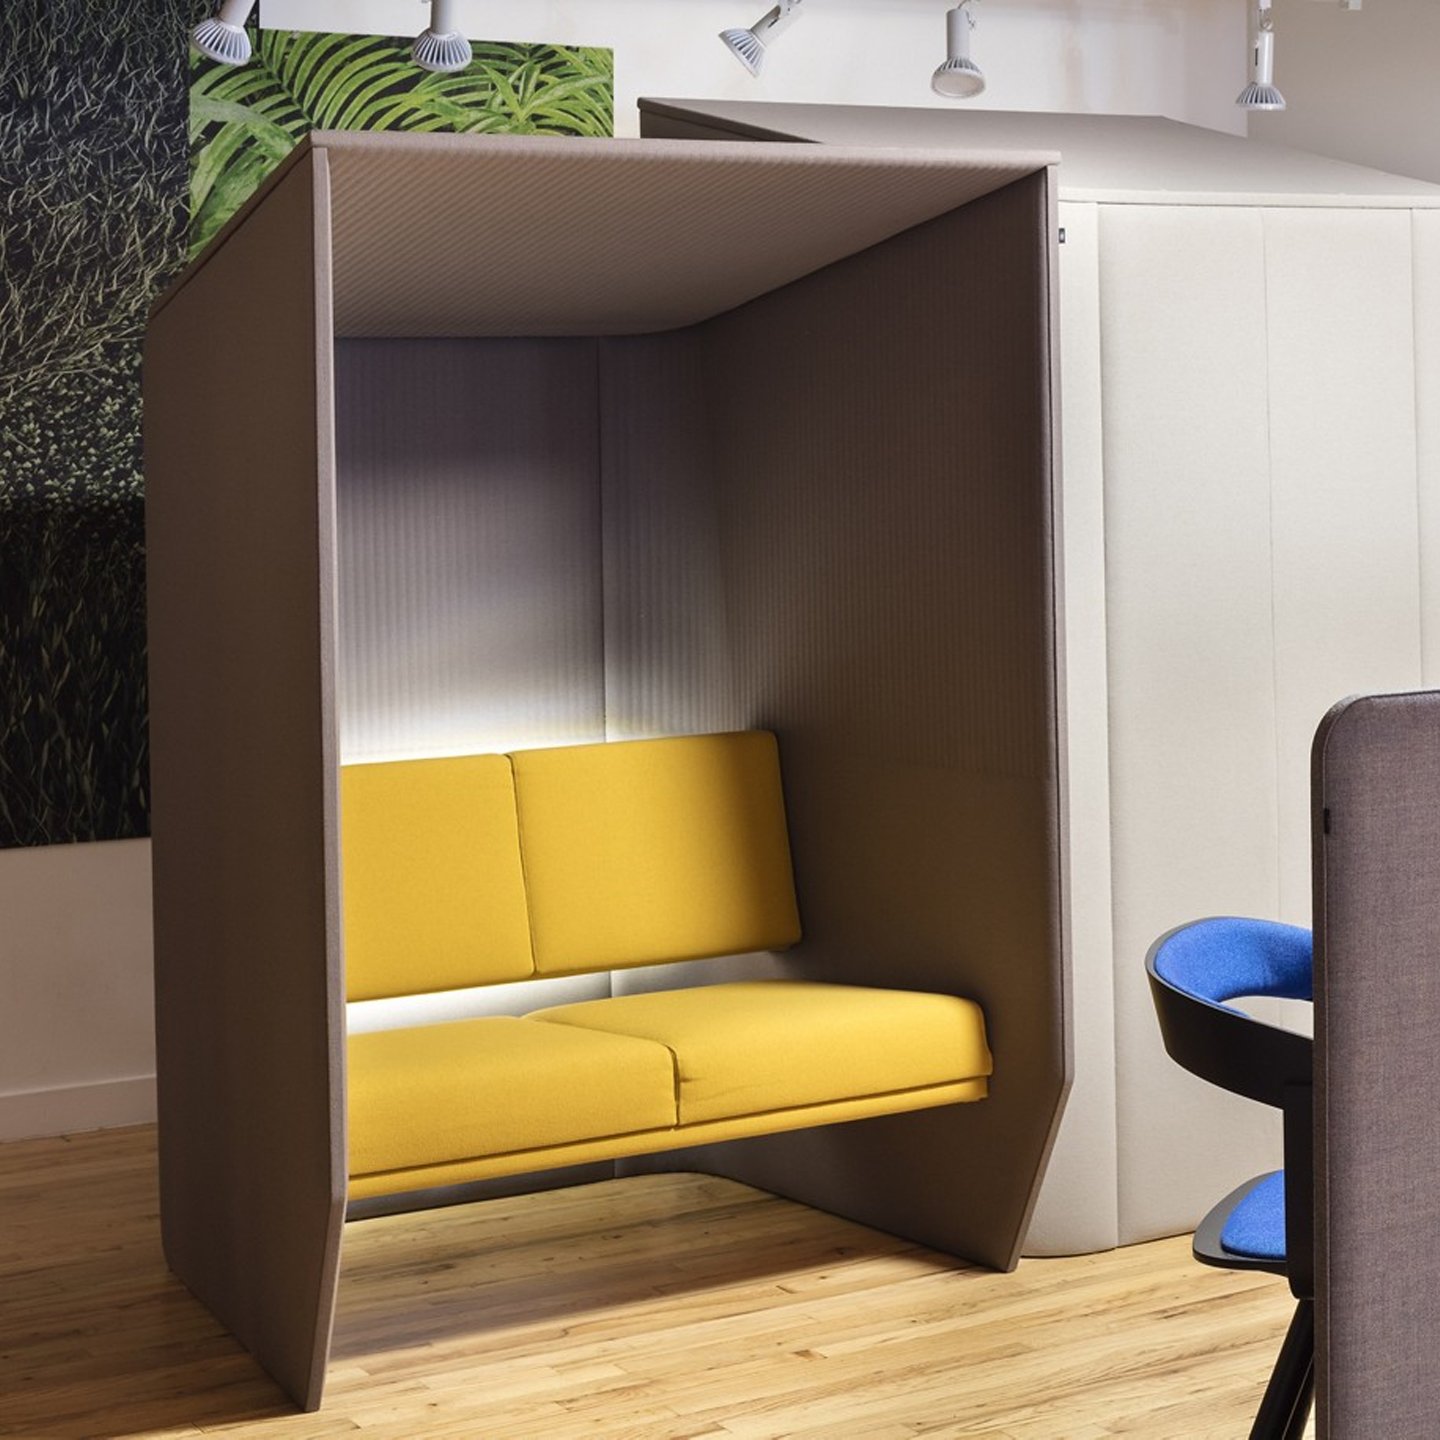 Haworth BuzziHub Booth in brown color with yellow chair fabric in office space